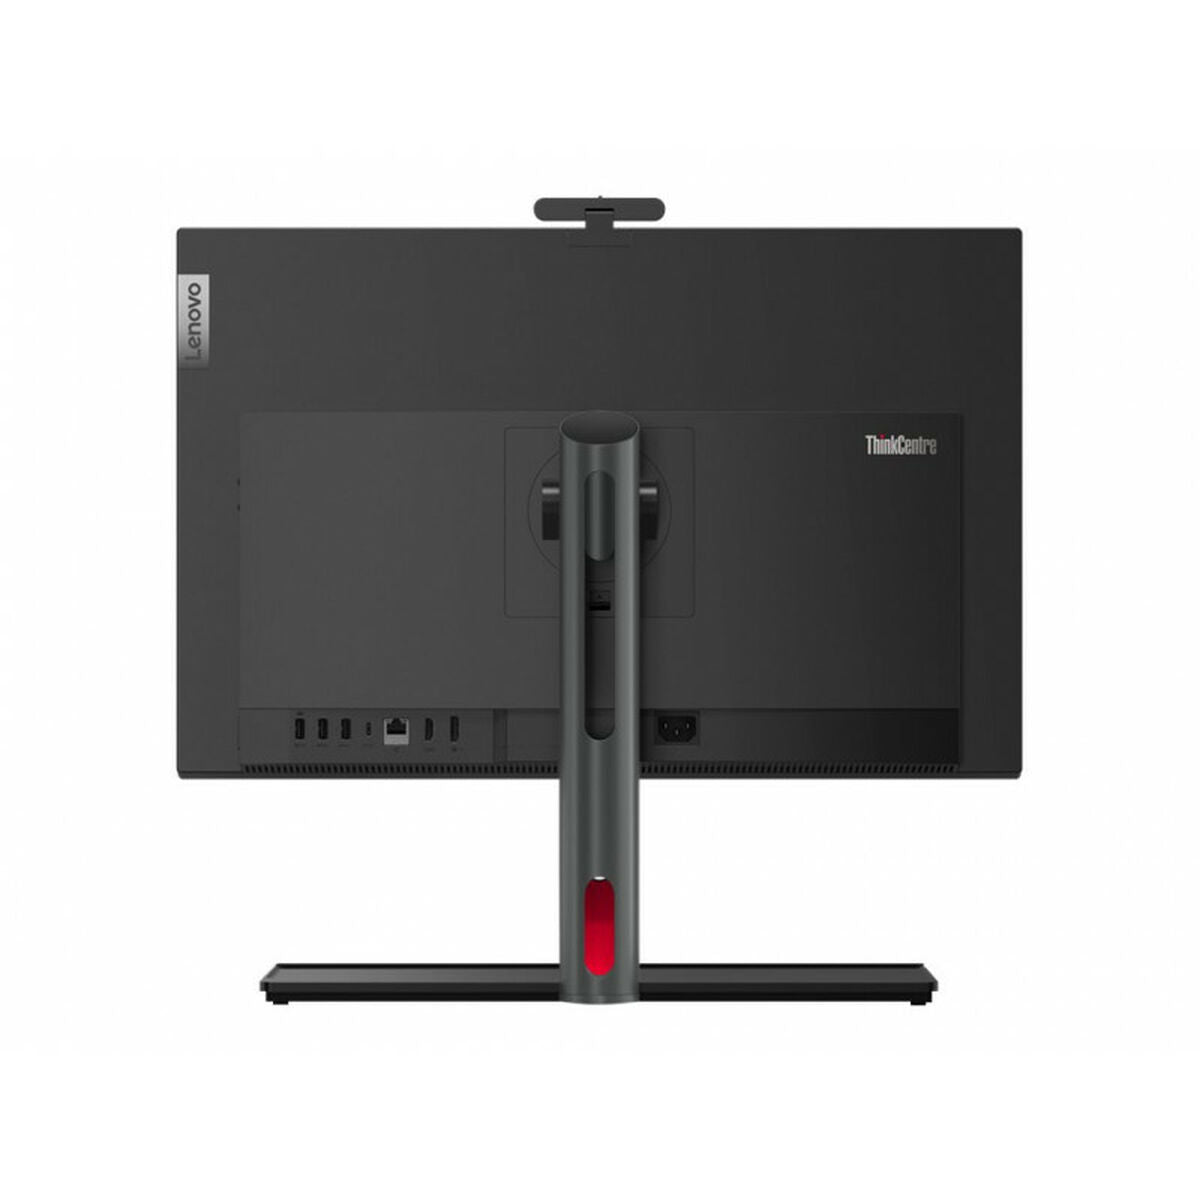 All in One Lenovo 11VA0026SP 23,8" Intel Core i7-12700 16 GB RAM 512 GB 512 GB SSD 16 GB, Lenovo, Computing, Desktops, all-in-one-lenovo-11va0026sp-no-23-8-intel-core-i7-12700-16-gb-ram-512-gb-512-gb-ssd-16-gb, :256 GB, :512 GB, :All in One, :Intel-i7, :RAM 16 GB, Brand_Lenovo, category-reference-2609, category-reference-2791, category-reference-2792, category-reference-t-19685, category-reference-t-19903, computers / components, Condition_NEW, office, Price_+ 1000, Teleworking, RiotNook